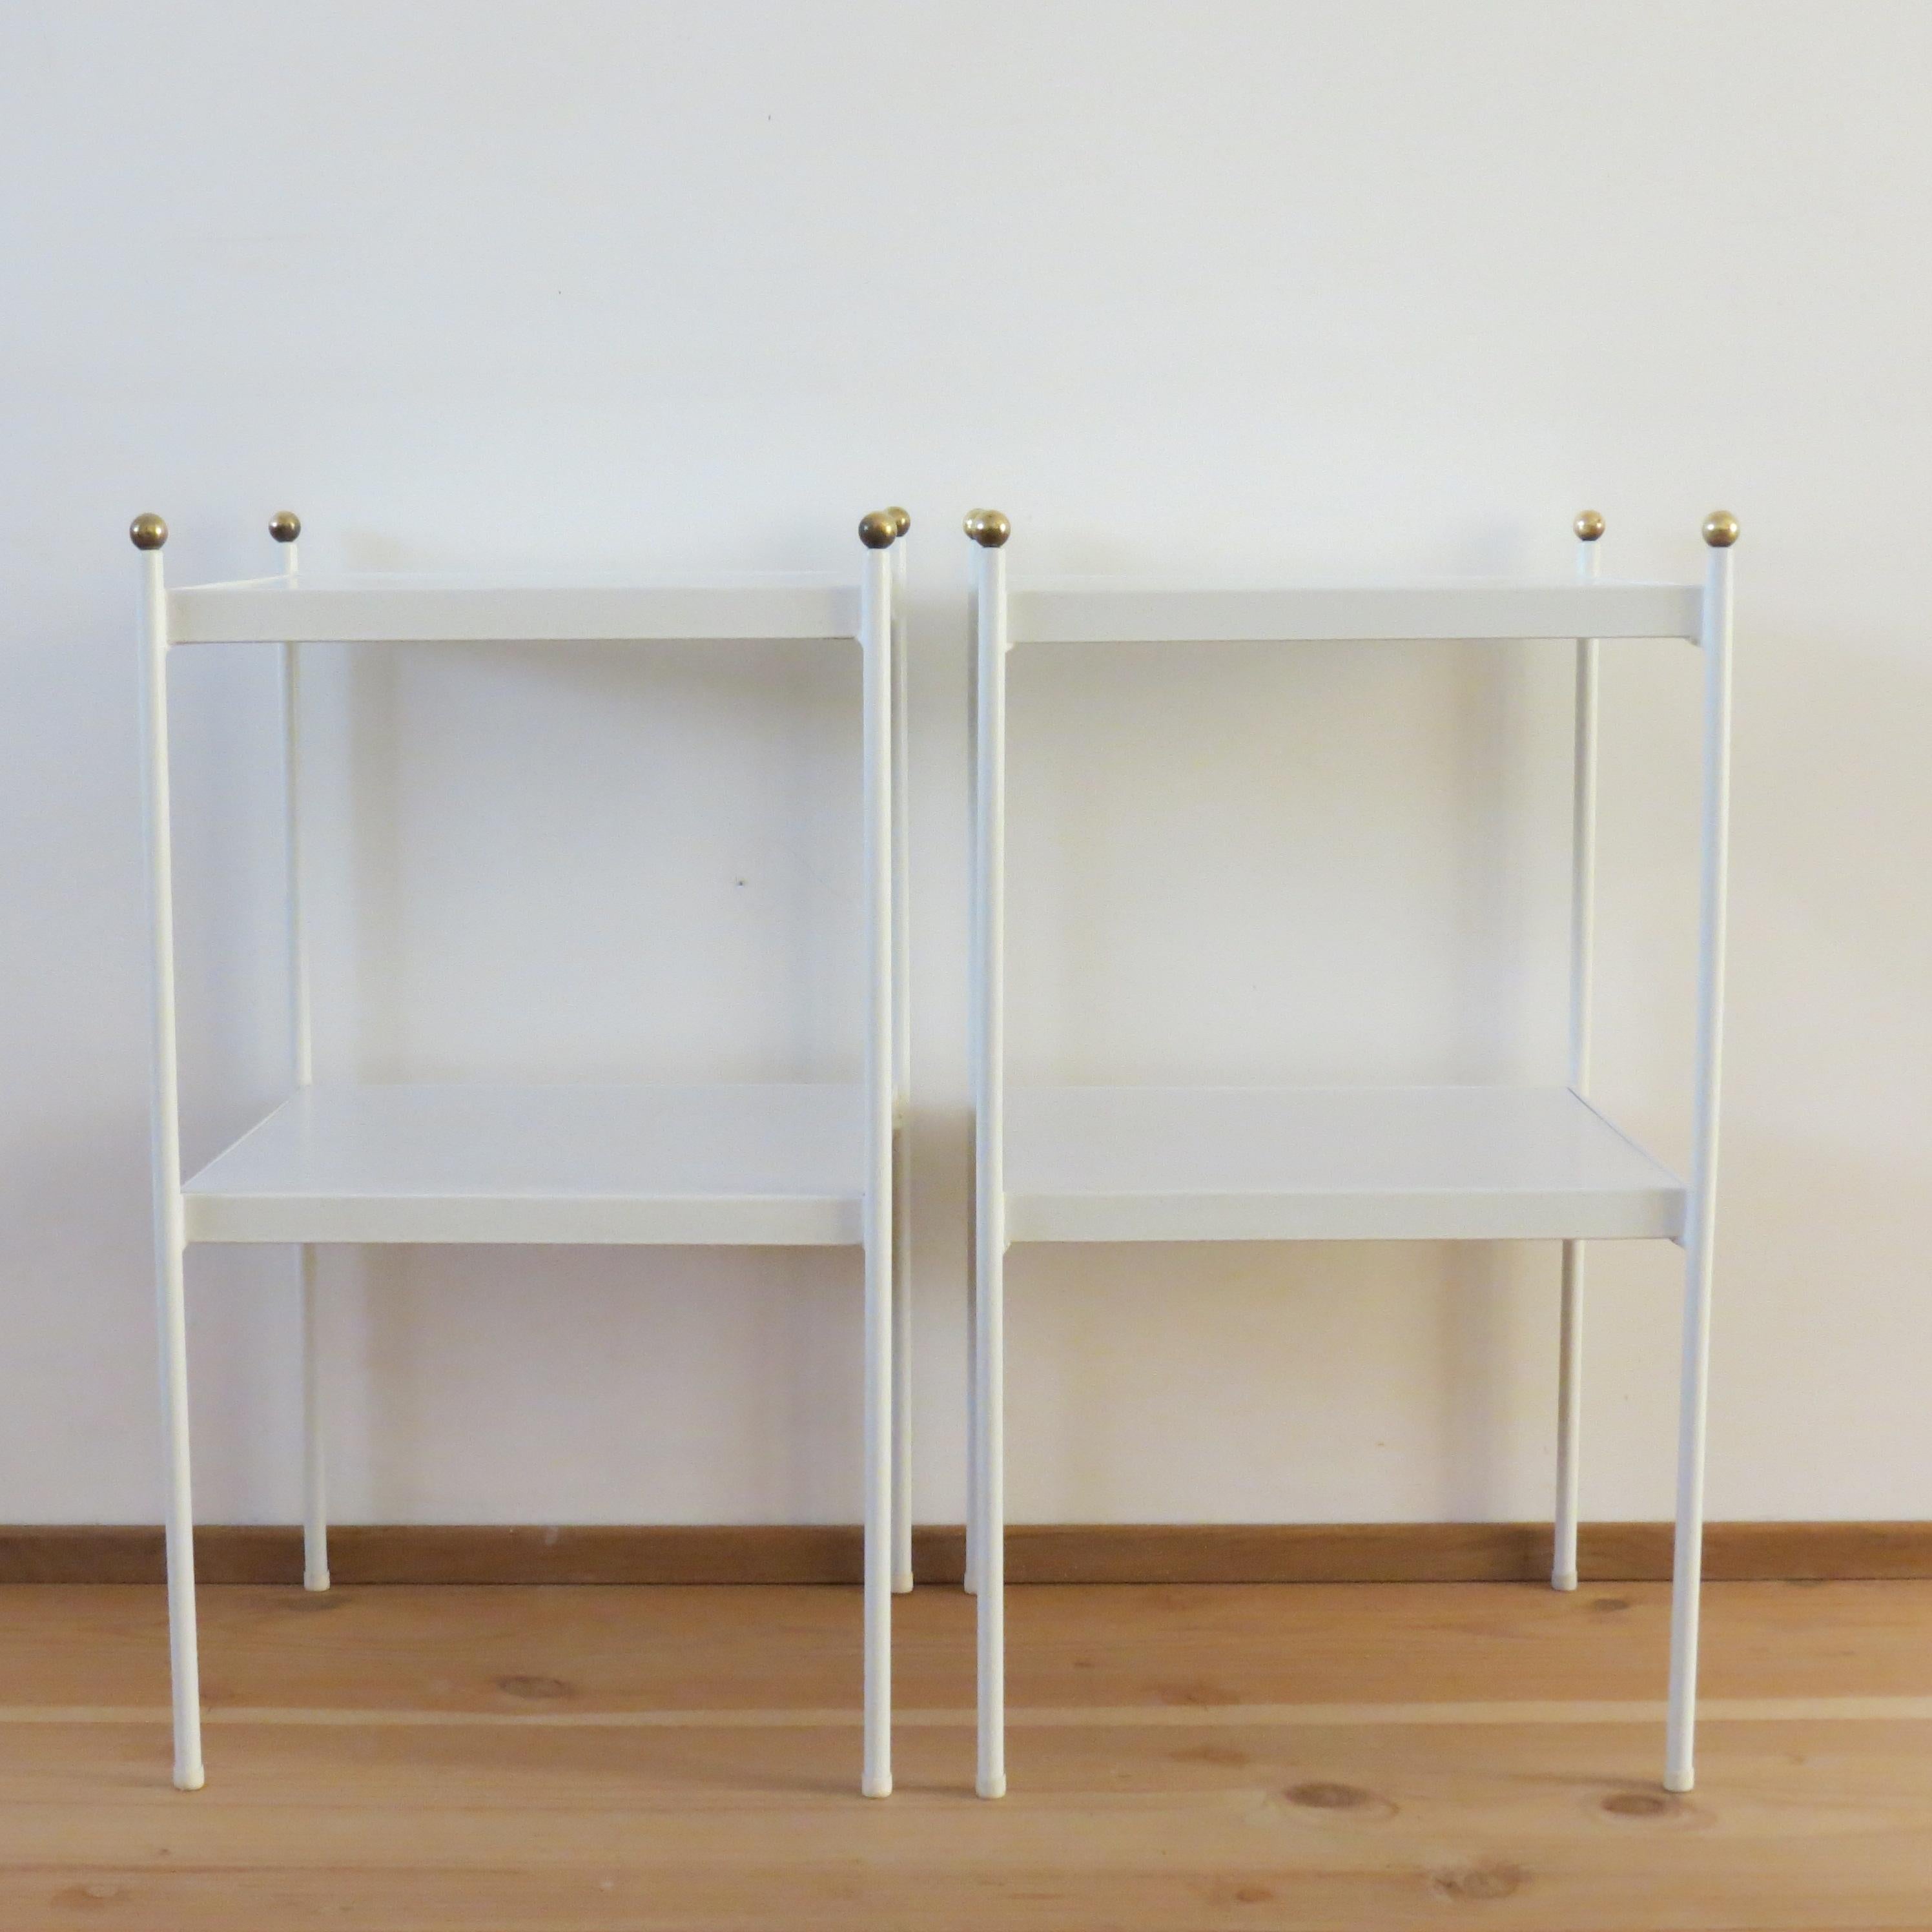 Pair of early 1960s metal bedside cabinets or side tables with very nice brass detail. Steel rod frames retain the original white enamel finish. White laminate shelves. Solid brass finial ball detail. Very good quality heavy tables.